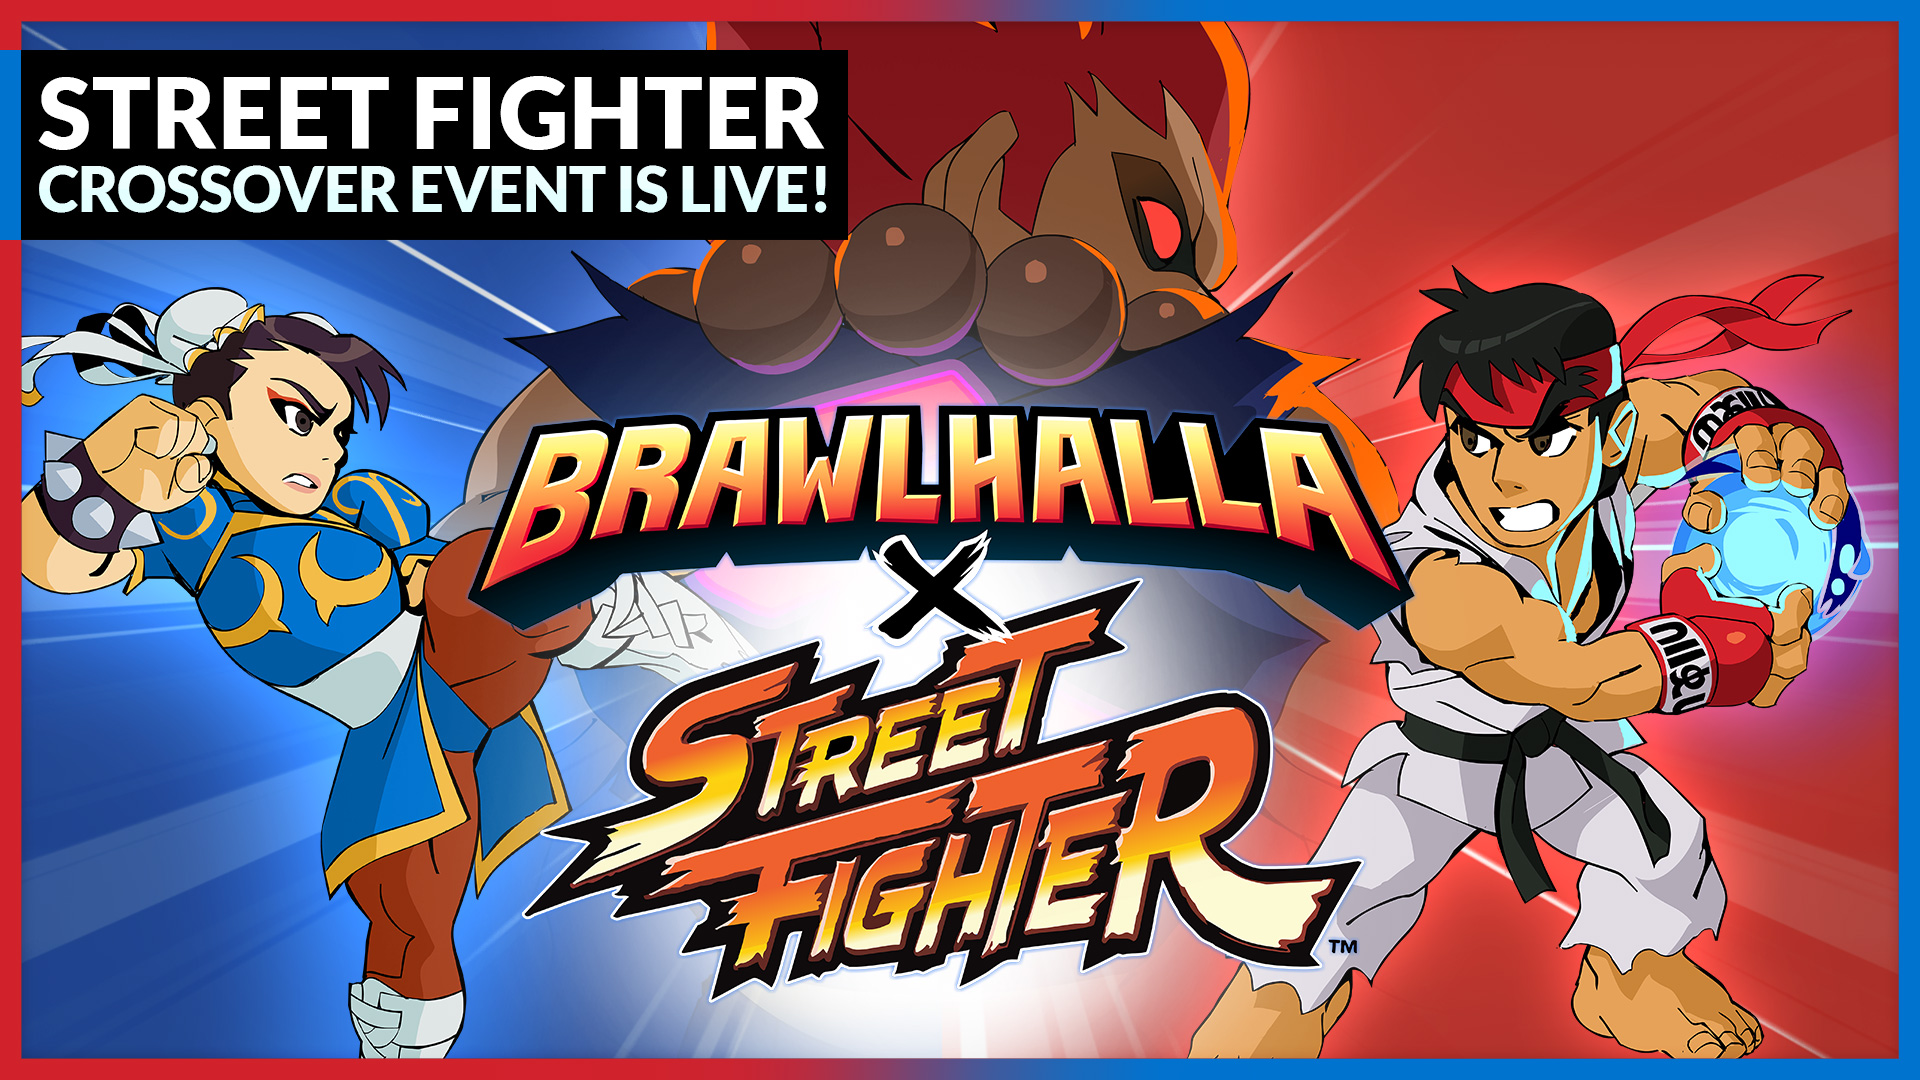 Brawlhalla X Street Fighter Are Ready to Fight! &#8211; Patch 6.01